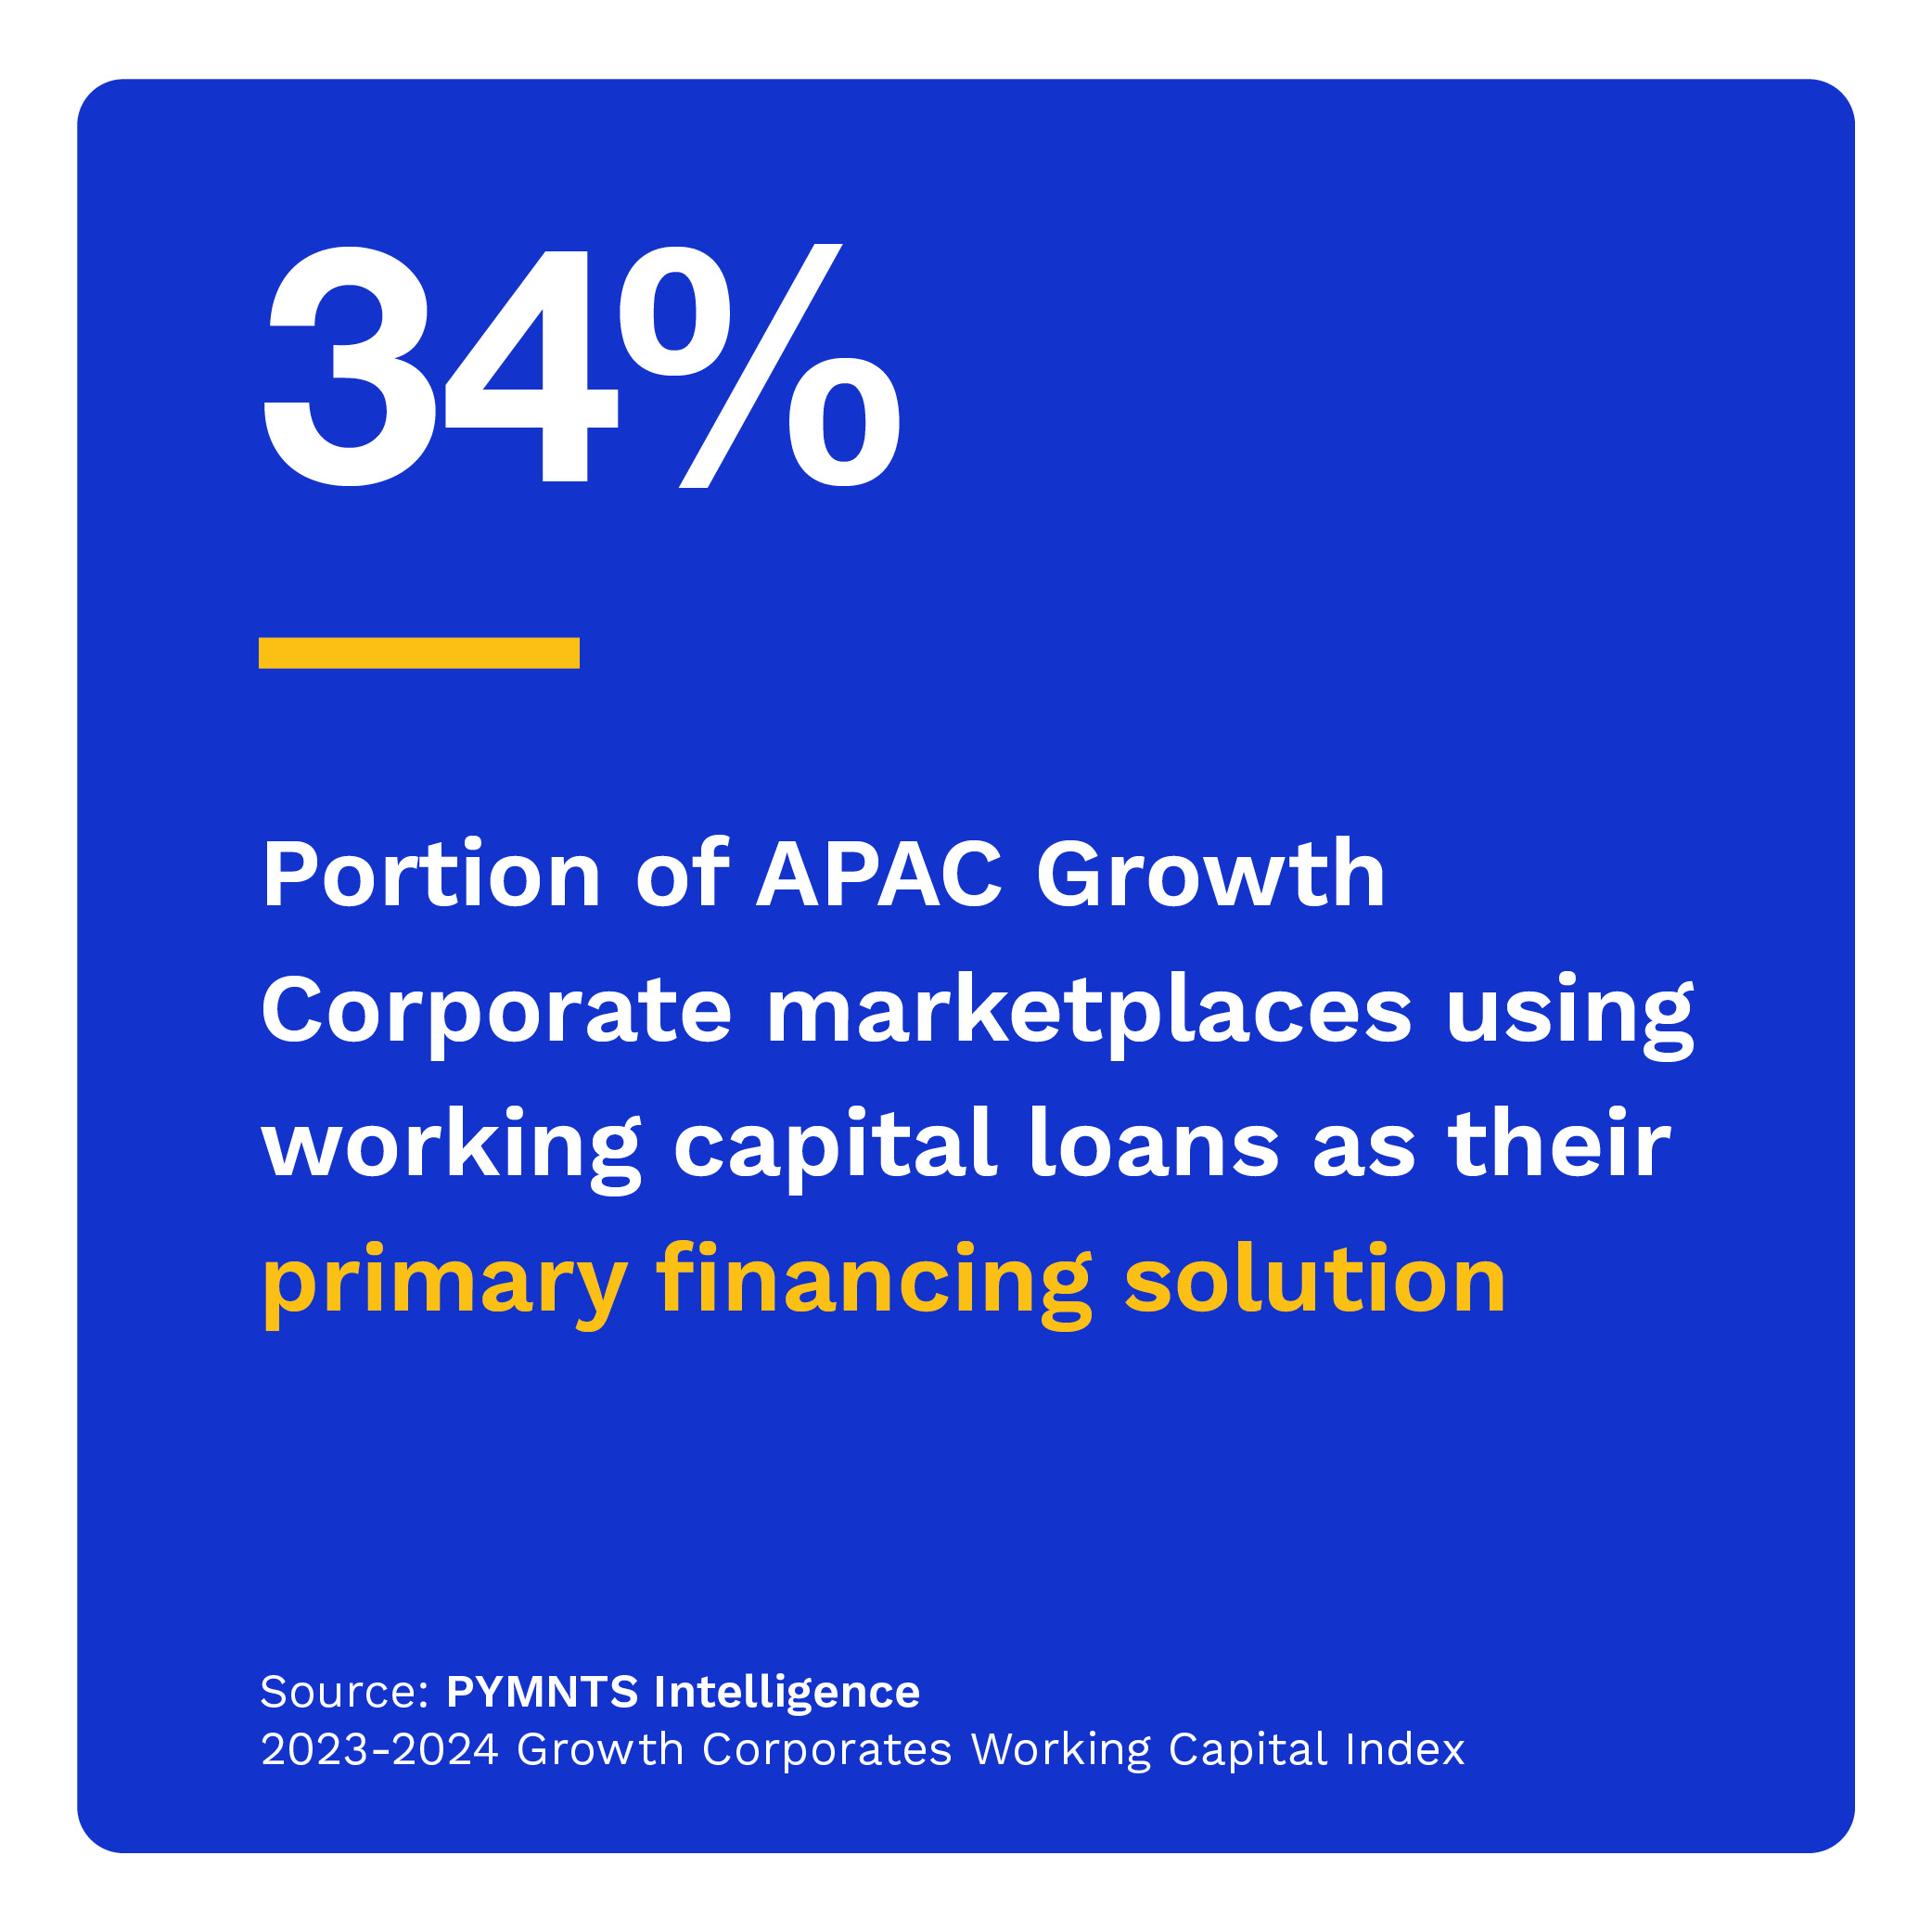 34%: Share of APAC Growth Corporate marketplaces using working capital loans as their primary financing solution